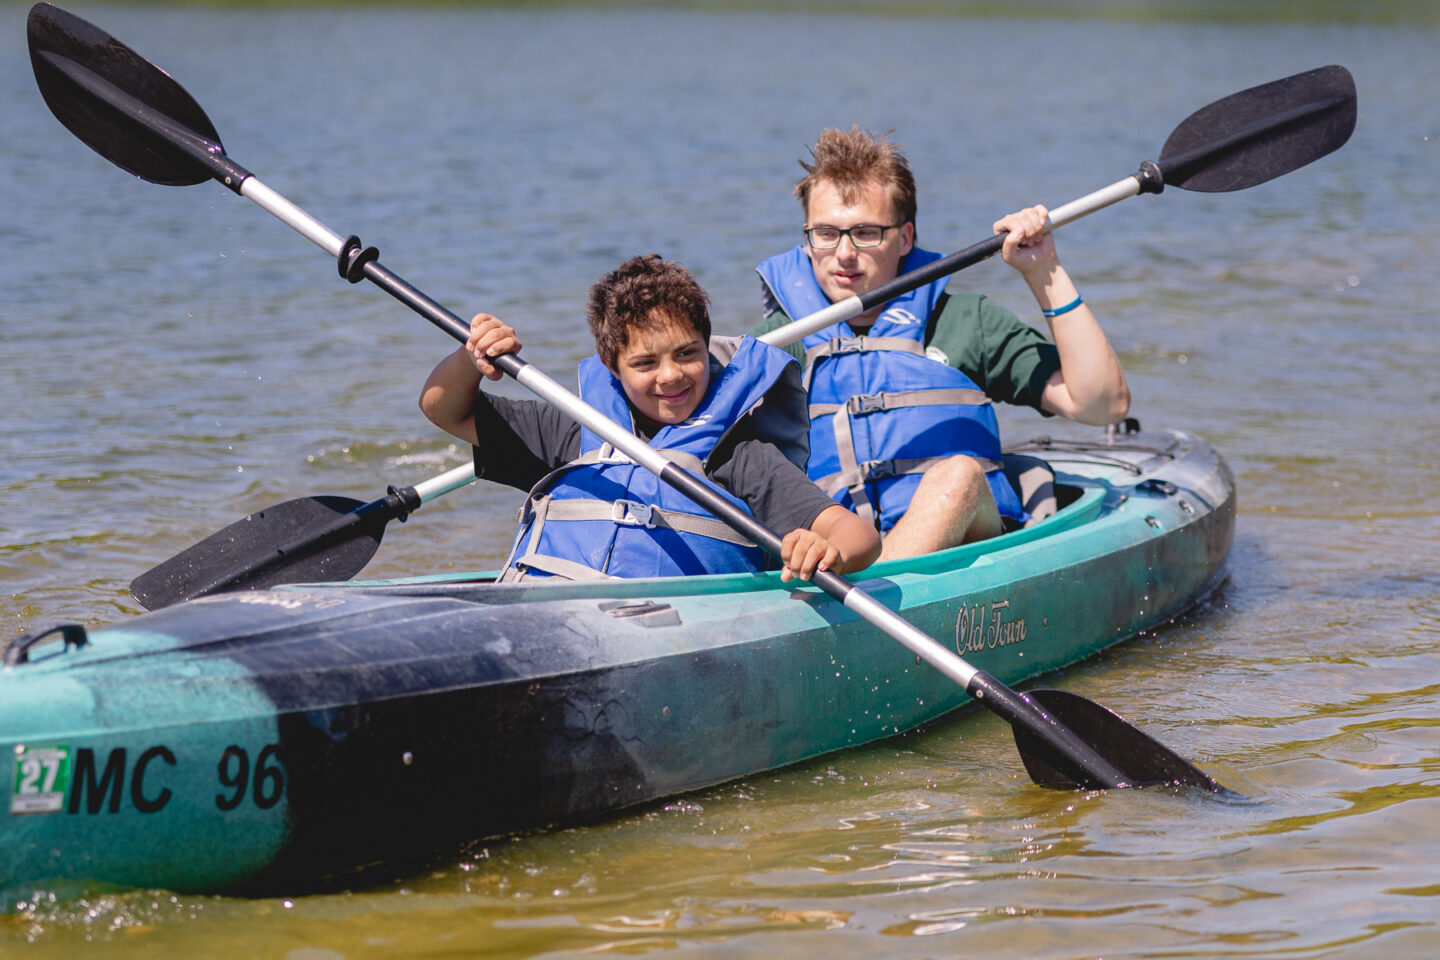 Two individuals in blue life jackets paddling a kayak on a lake, participating in an adaptive sports clinic at Millennium Park.